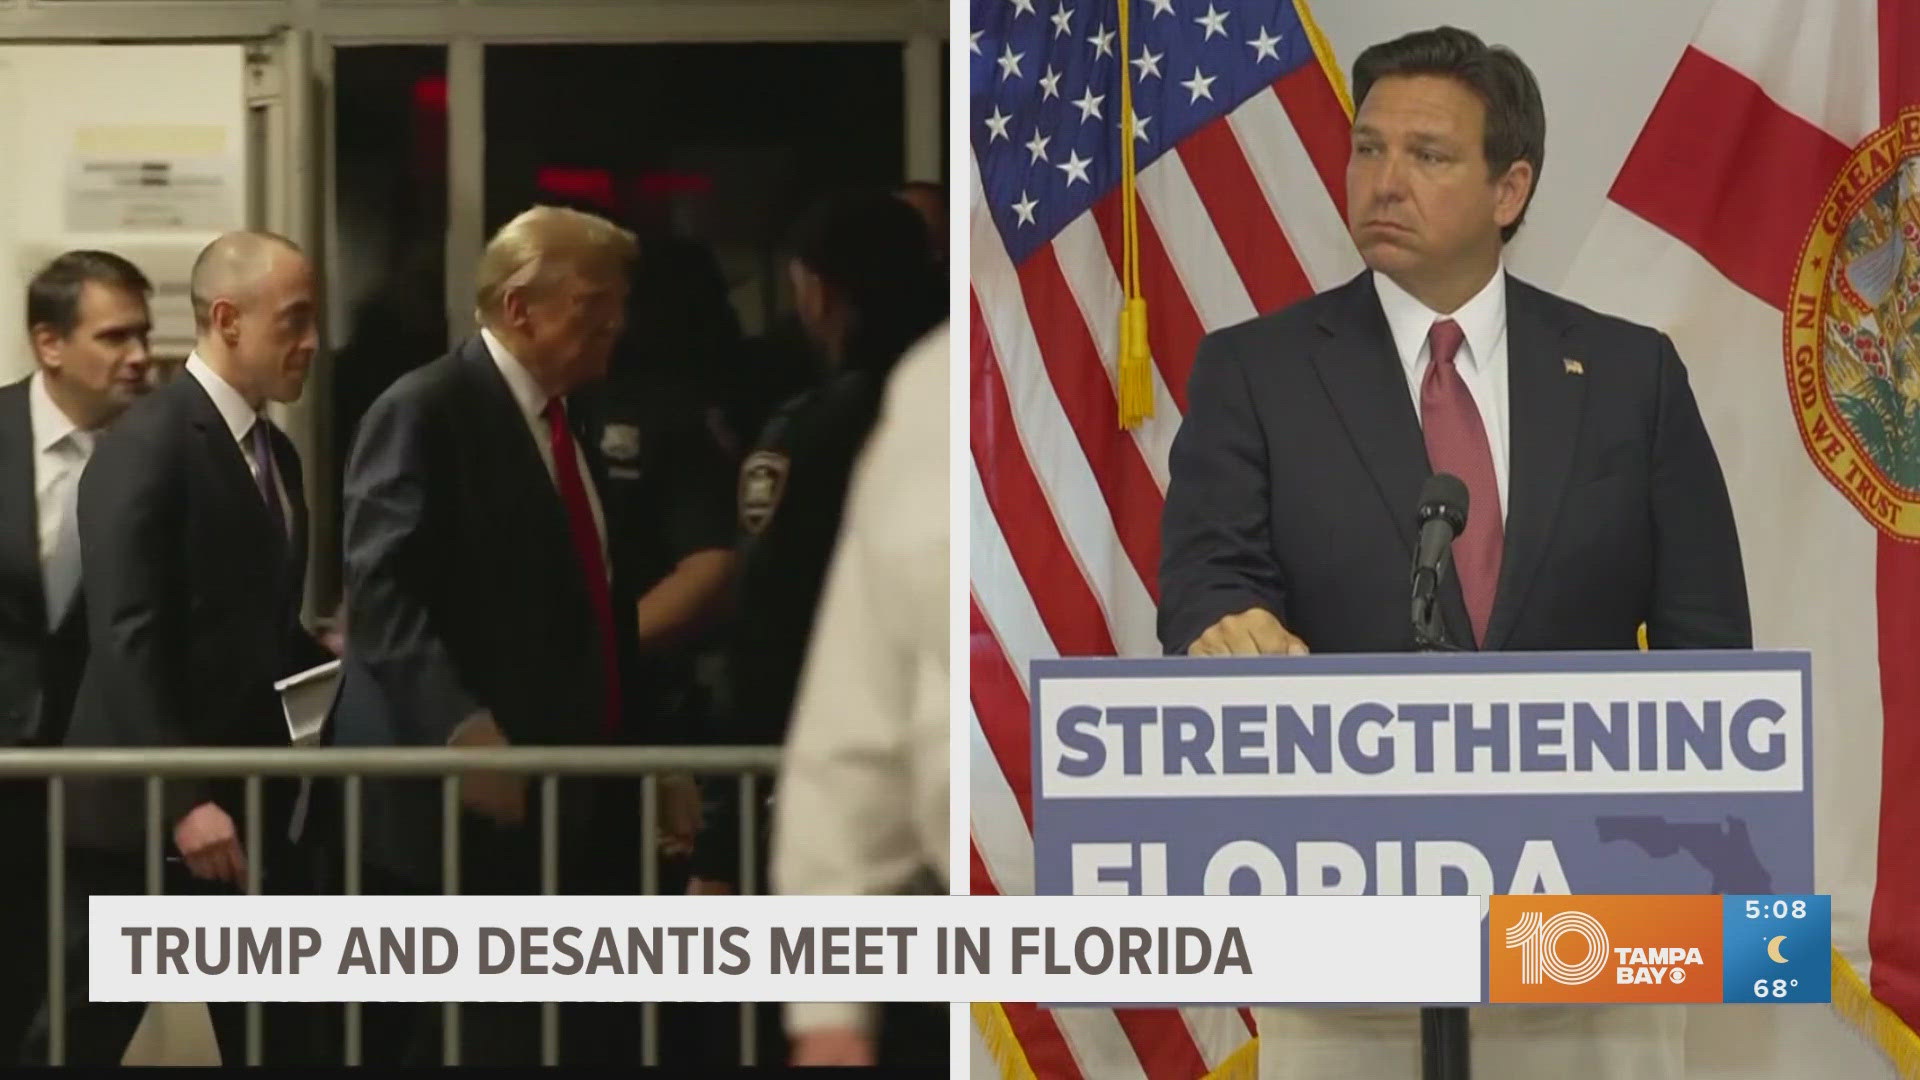 Reports mark this as the first time the two have met since DeSantis ended his presidential campaign in January and endorsed the former President.